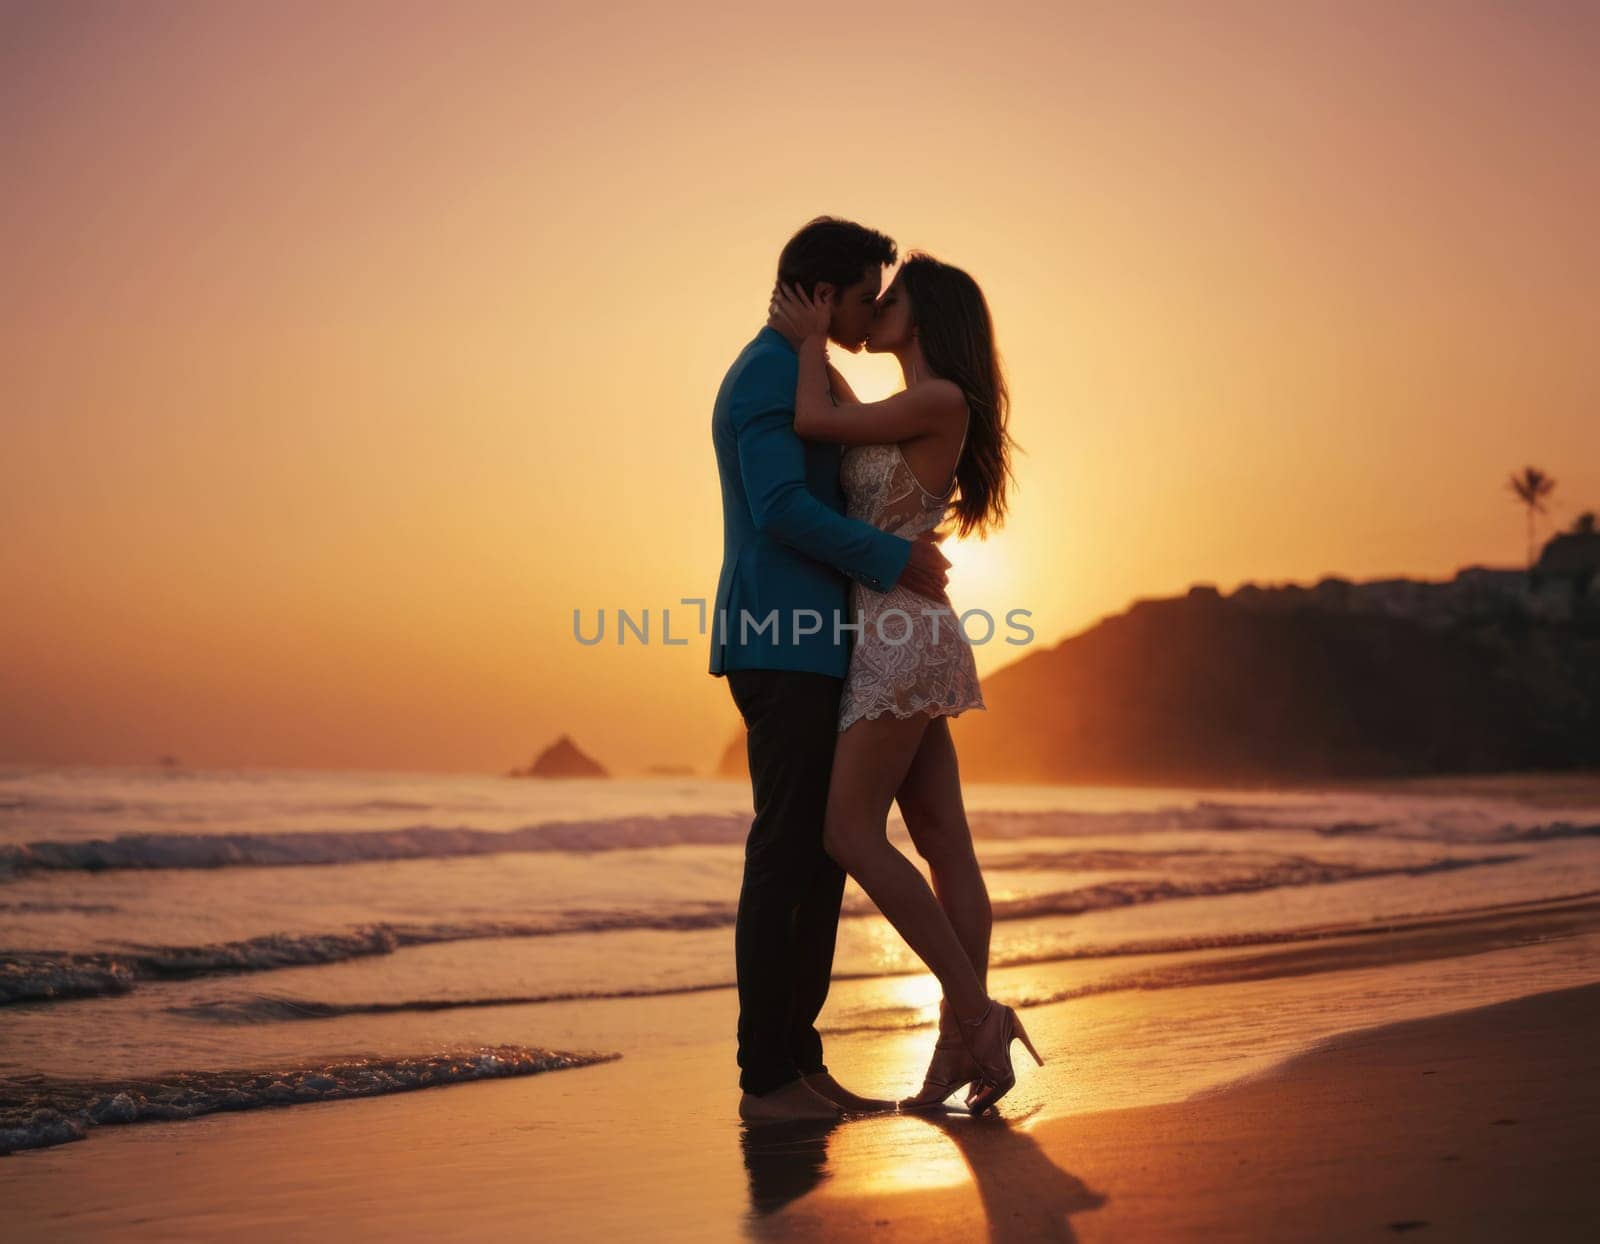 A romantic silhouette of a couple kissing on the beach at sunset, with waves crashing in the background